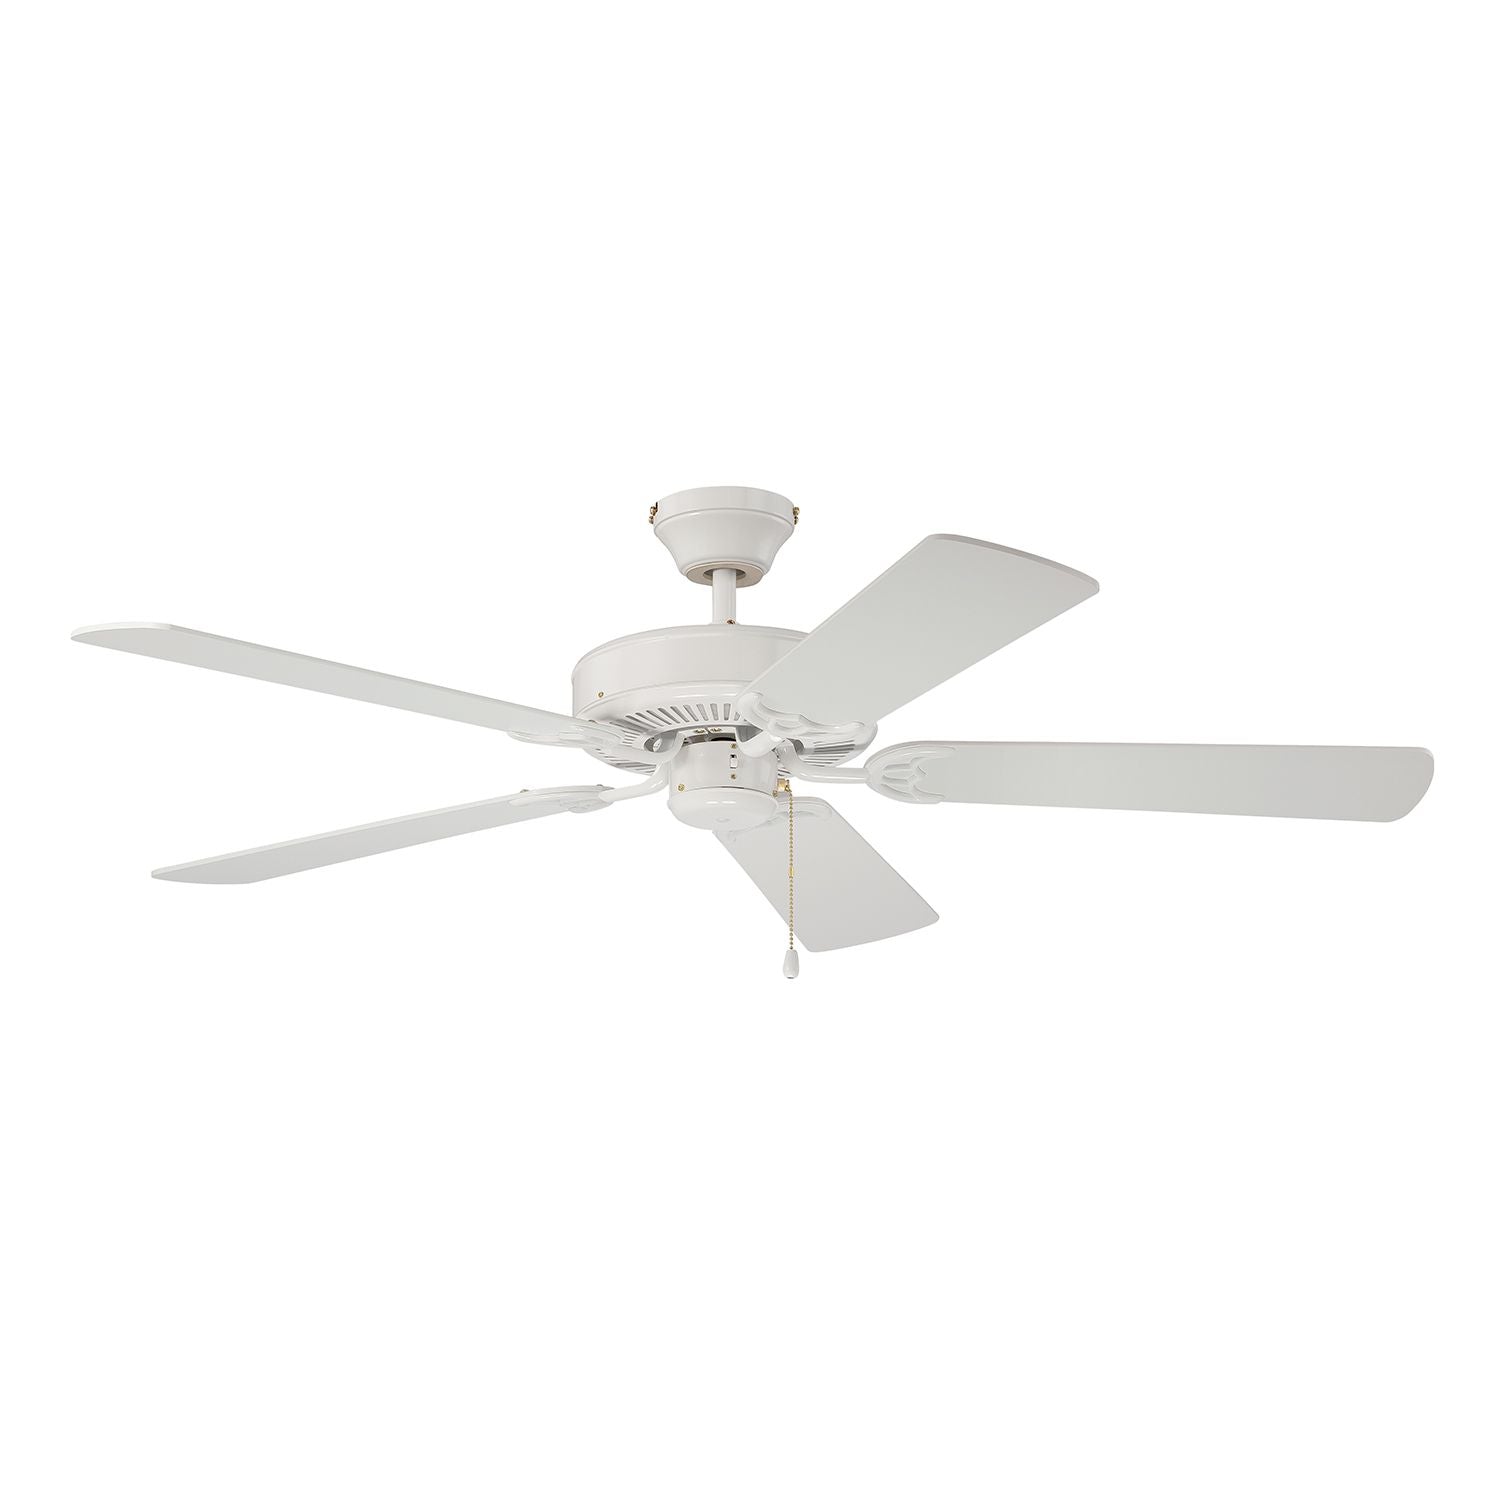 Builder'S Choice Ceiling Fan White with White blades